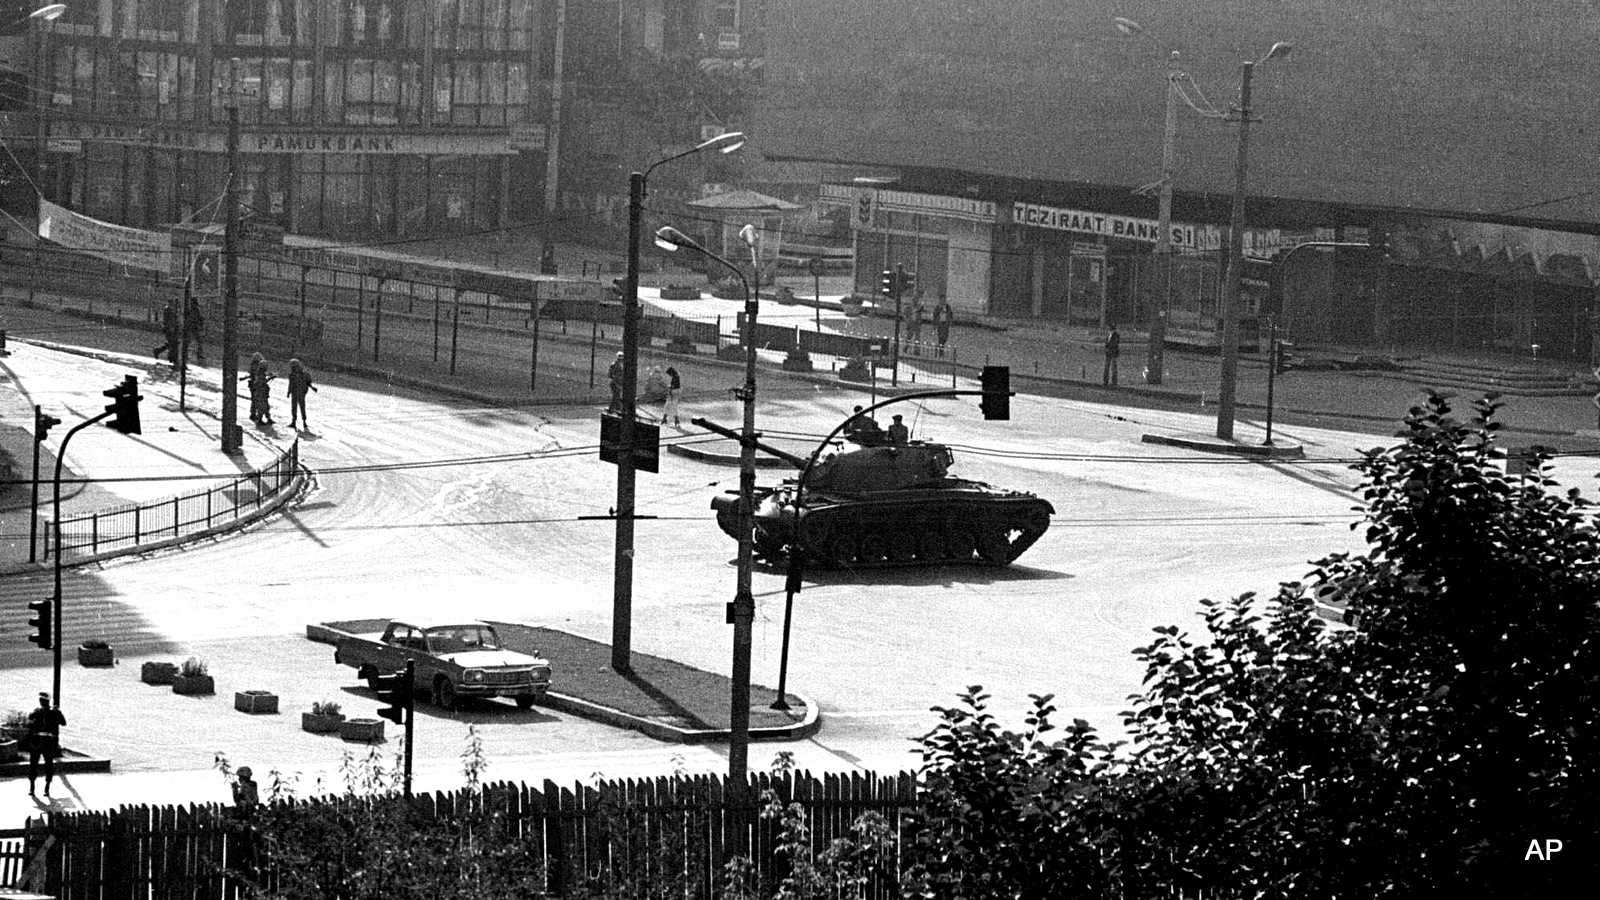 A military tank is stationed at the center of Kizilay, Ankara's main square, a few hours after a coup d'etat, early Sept. 12, 1980 in this photo. The army took over the country to quell leftist-rightist street battles that killing about a dozen people a day.